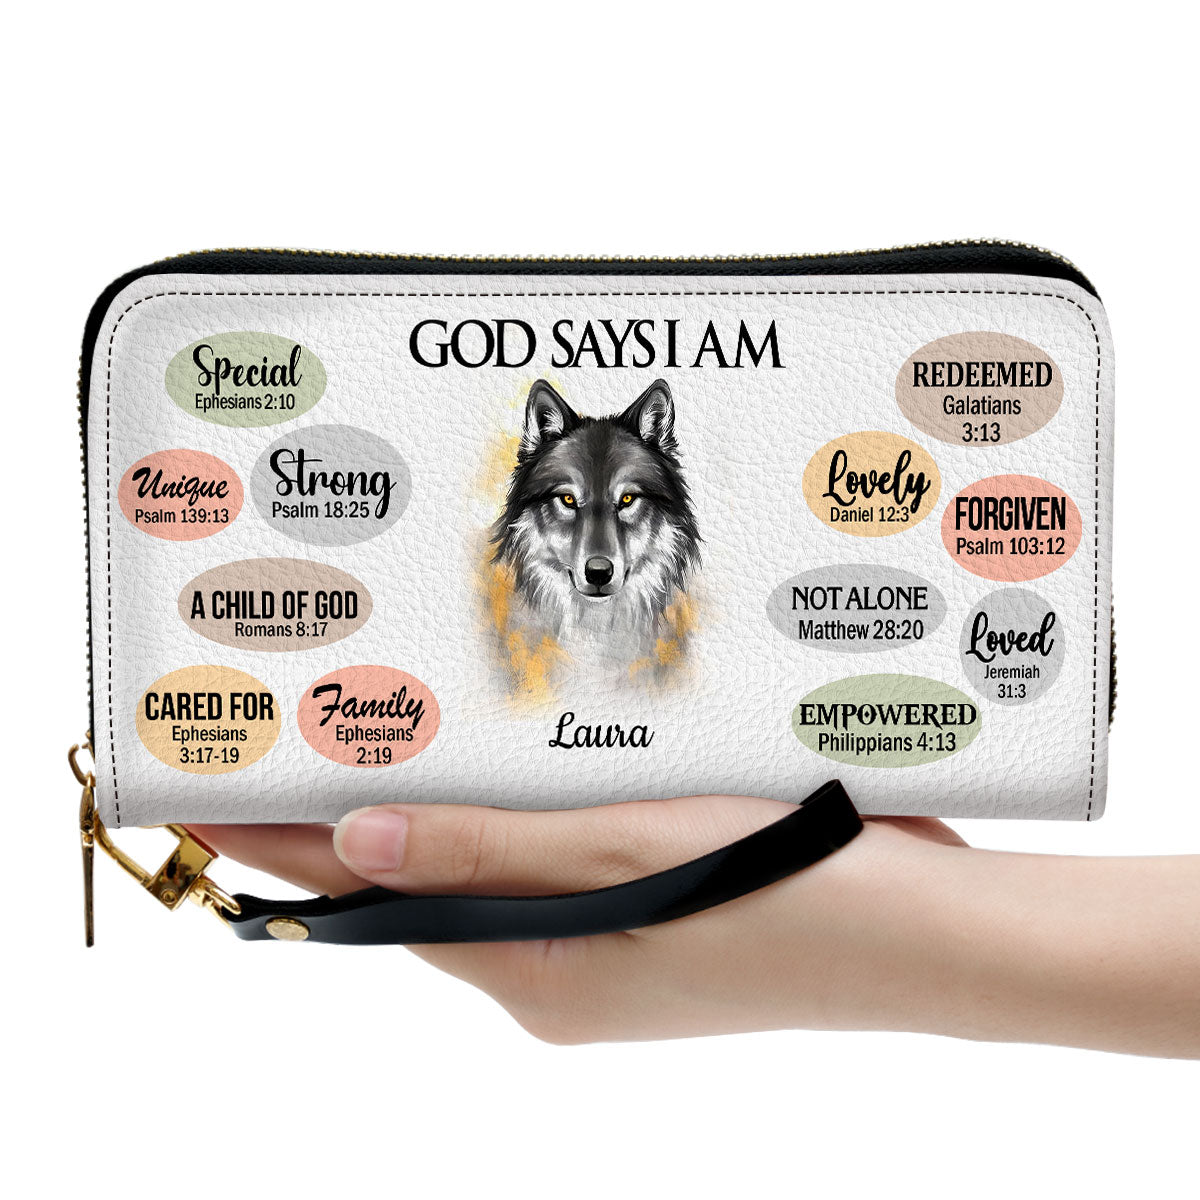 Animal Inspirational Gifts For Women Of God What God Says About You Clutch Purse For Women - Personalized Name - Christian Gifts For Women